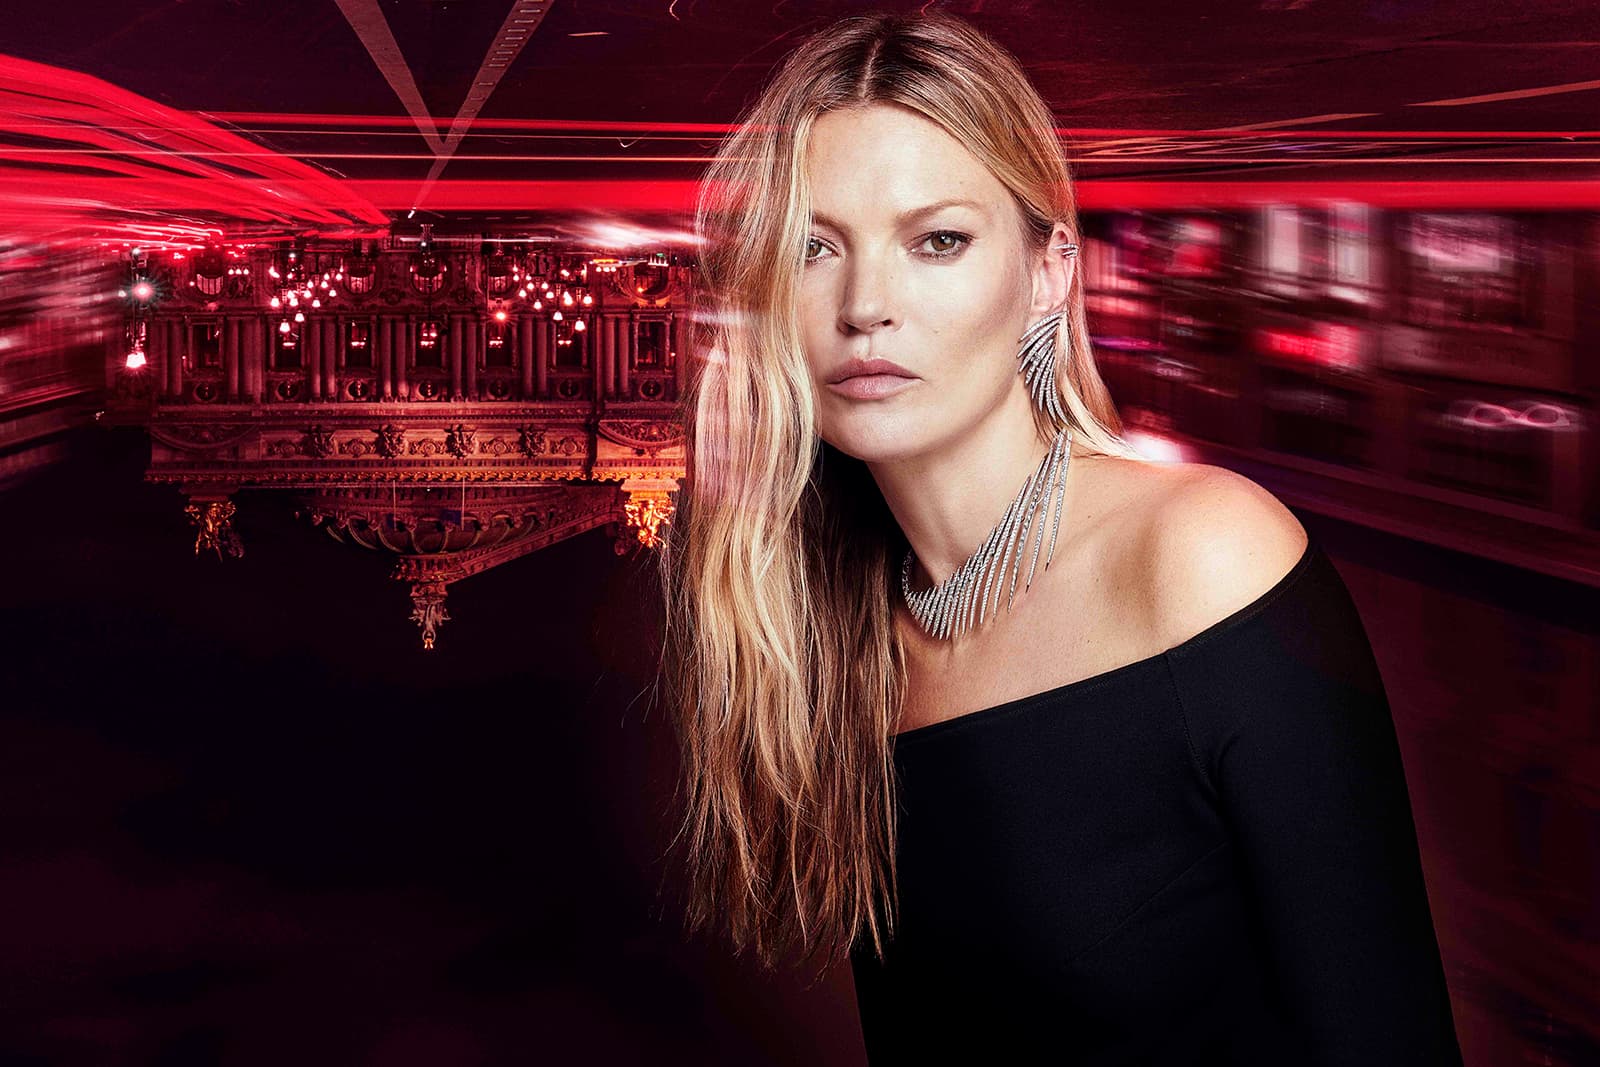 Messika x Kate Moss Collection earrings and necklace inspired by feathers